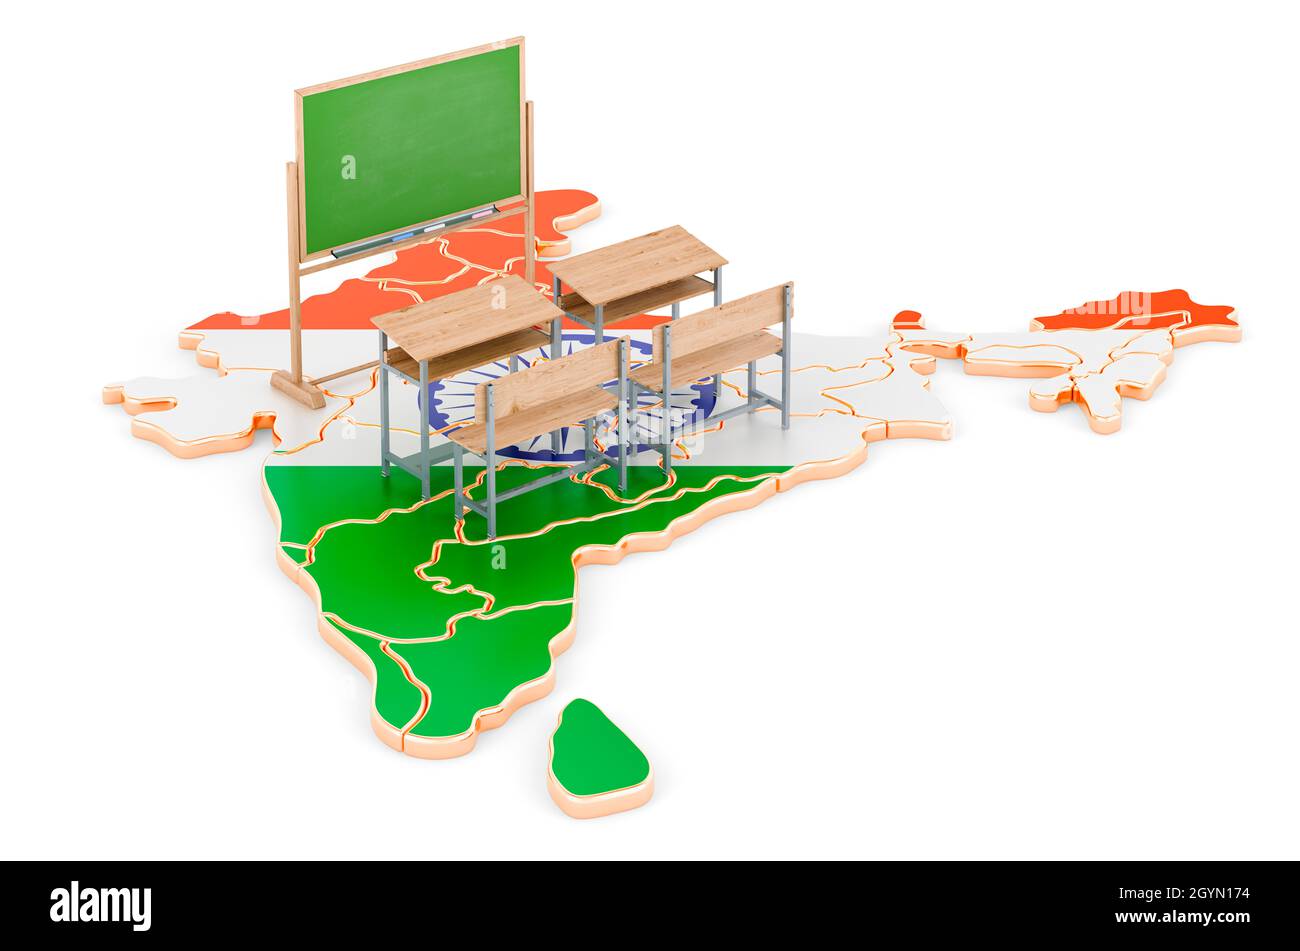 Education in India, concept. School desks and blackboard on India map. 3D rendering isolated on white background Stock Photo